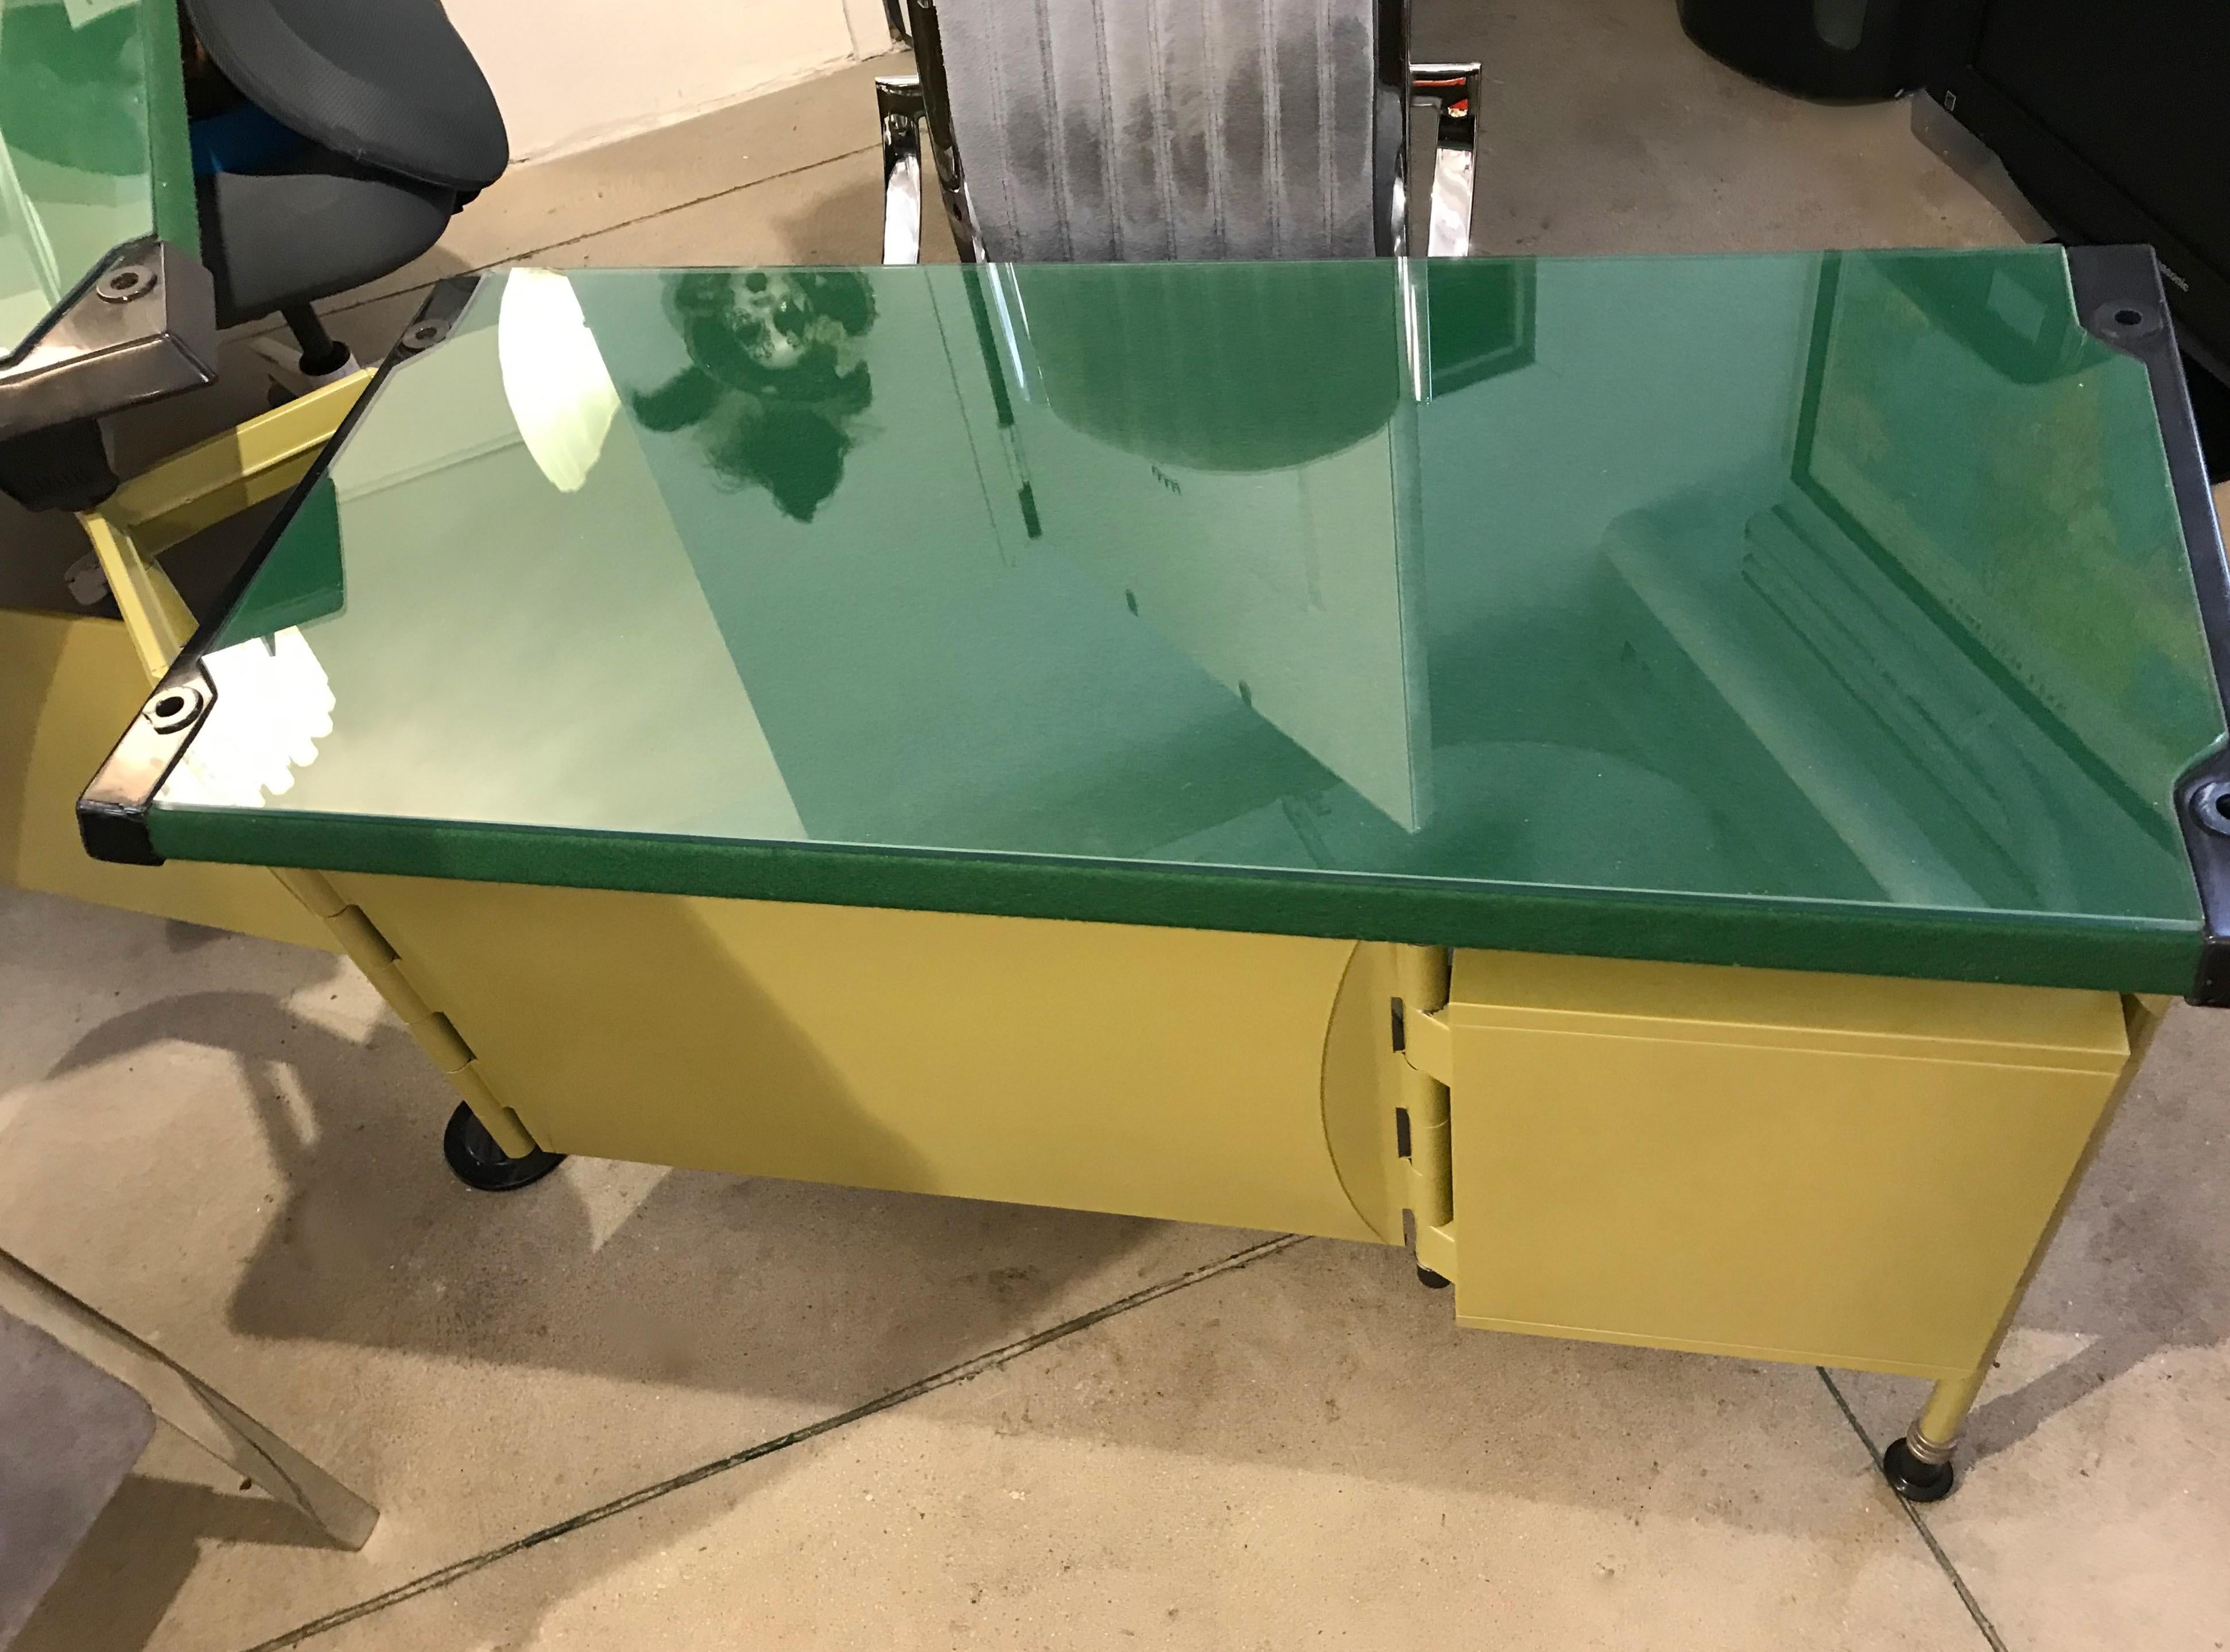 Italian BBPR for Olivetti 1960 Green Modernist Desk with Black Accents and Side Bureau